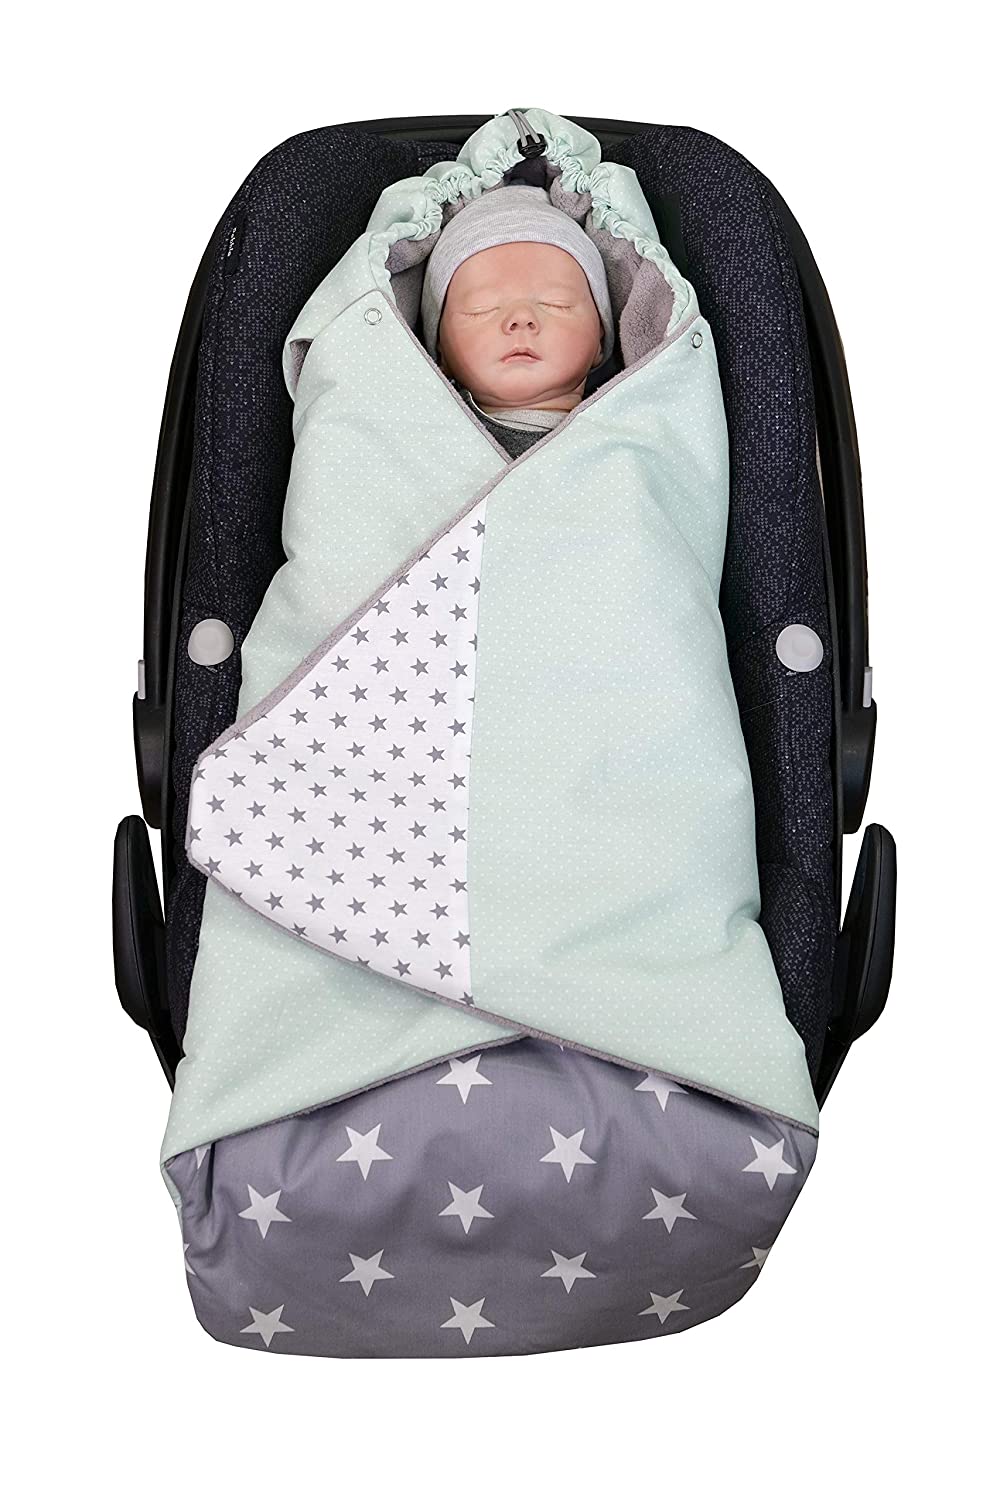 Ullenboom ® Baby Swaddling Blanket Summer Mint Grey (Made in EU) – Blanket for Baby Car Seat & Prams, Compatible with Maxi Cosi® Car Seat, Ideal for 0 to 9 Months